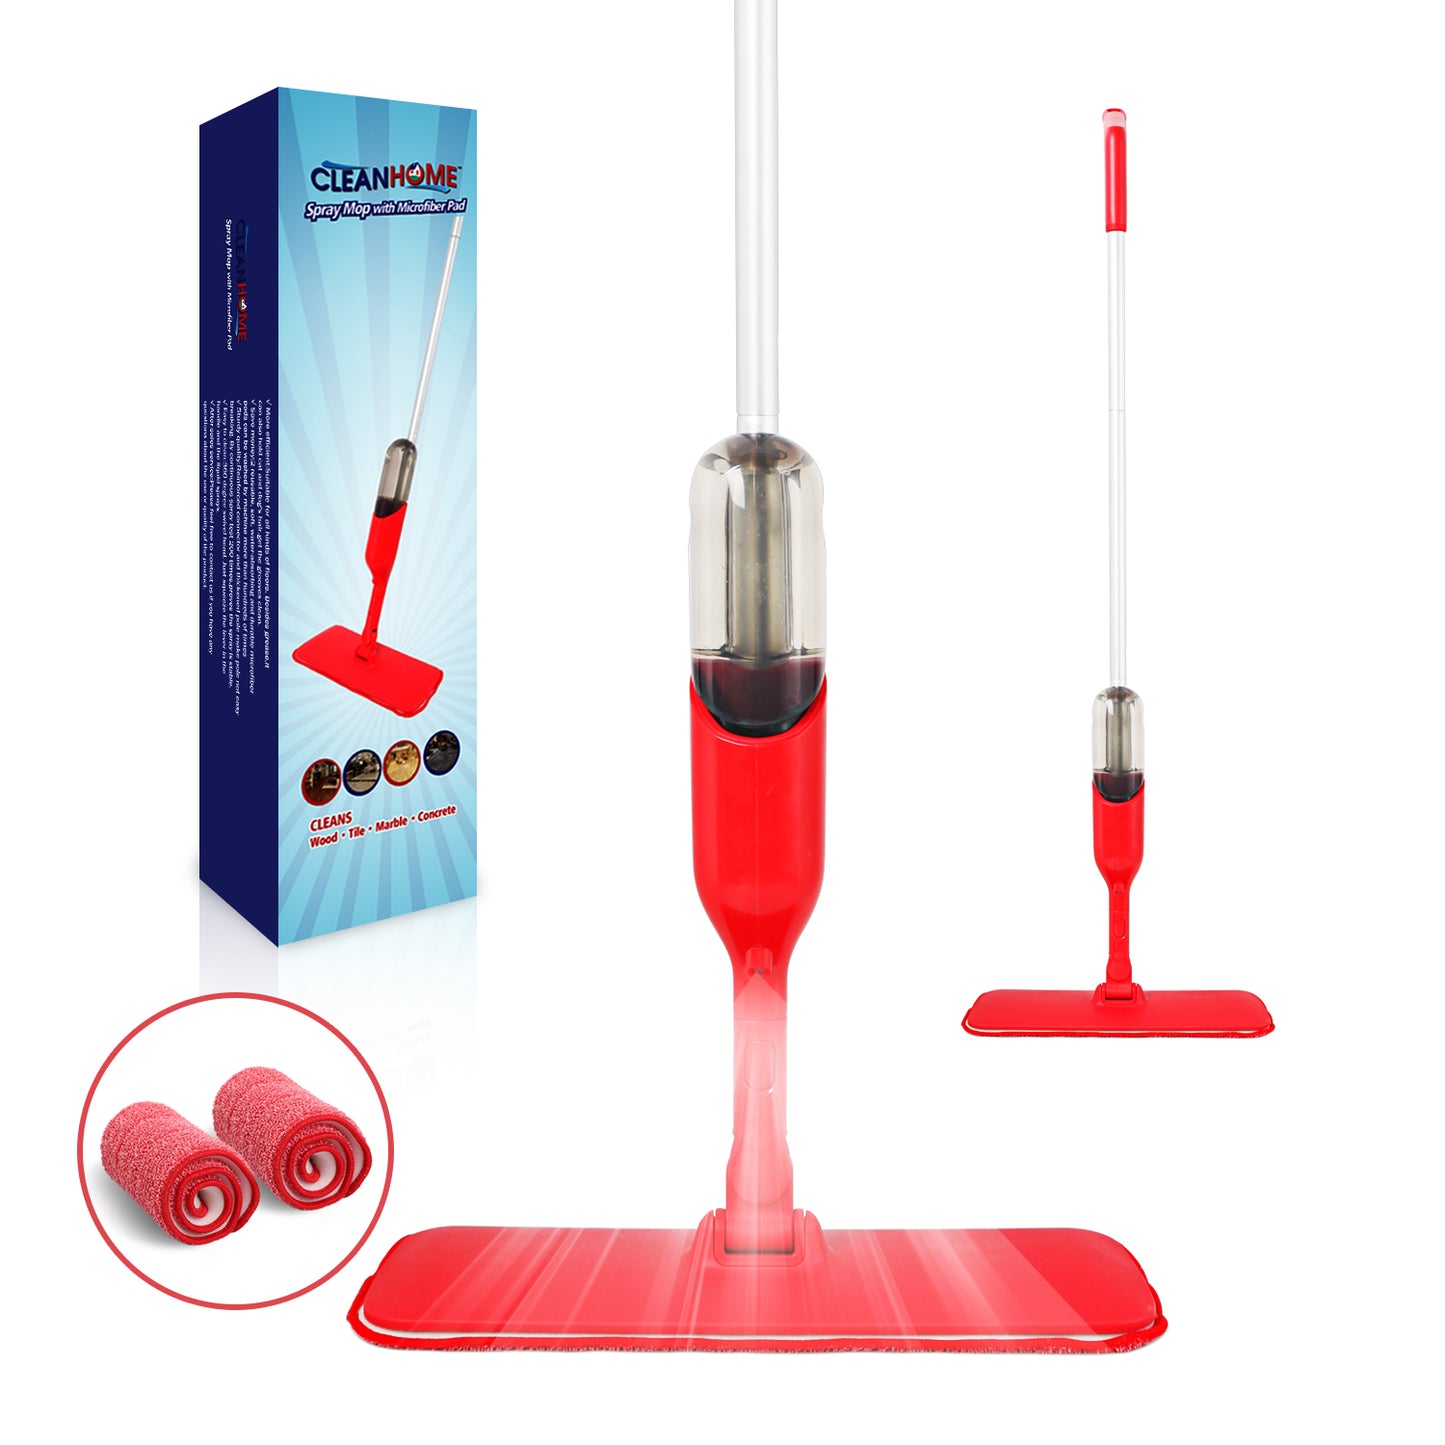 Yocada Microfiber Spray Mop for Wood Floor Cleaning with 2 Washable Mop Pads 360 Degree, 400ML, Red